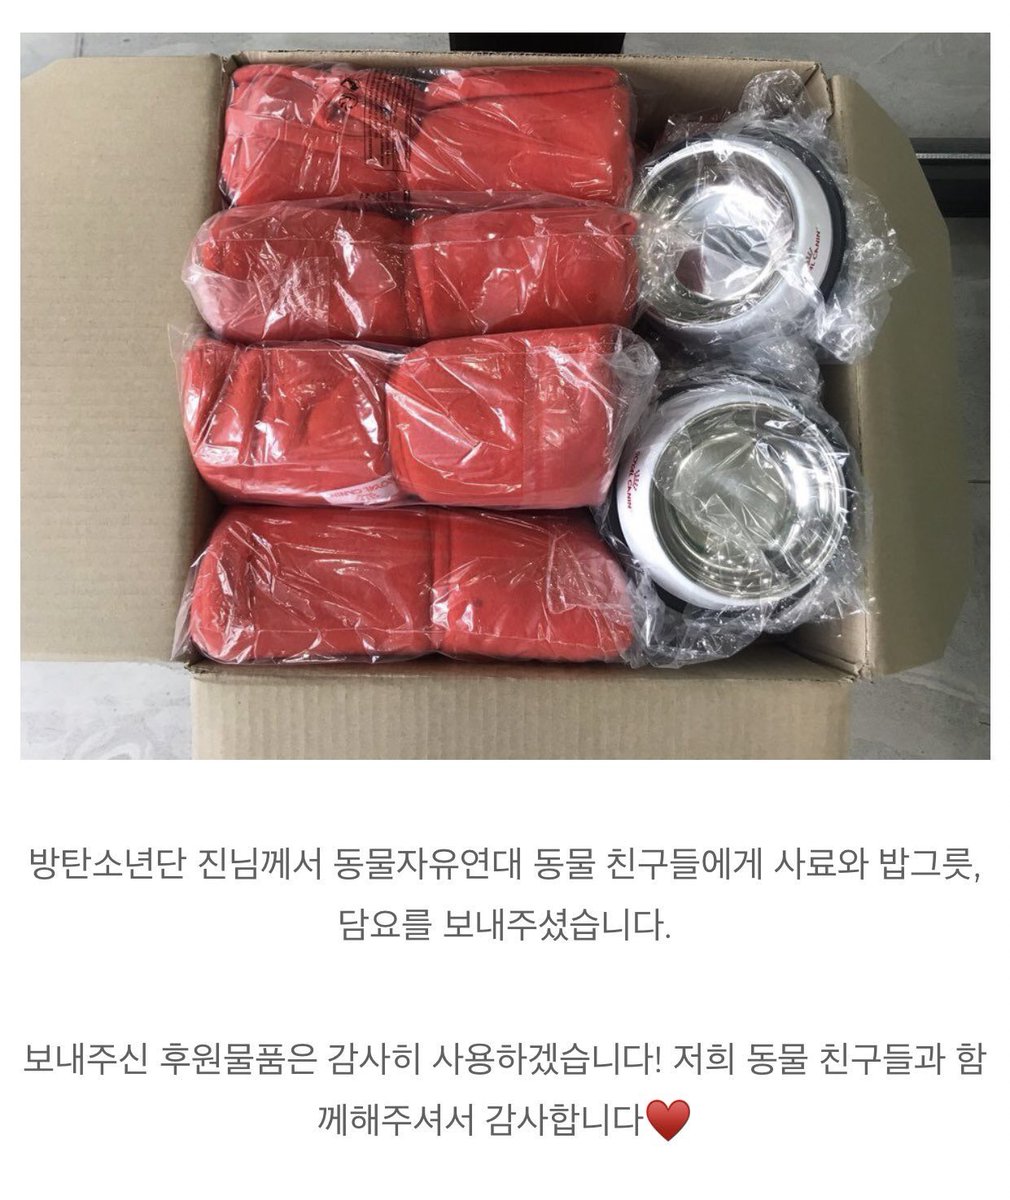 Seokjin donated 321kg of food to [KARA] its a non profit og. He also donated food, blankets bowls to Korean animal welfare og on his birthday